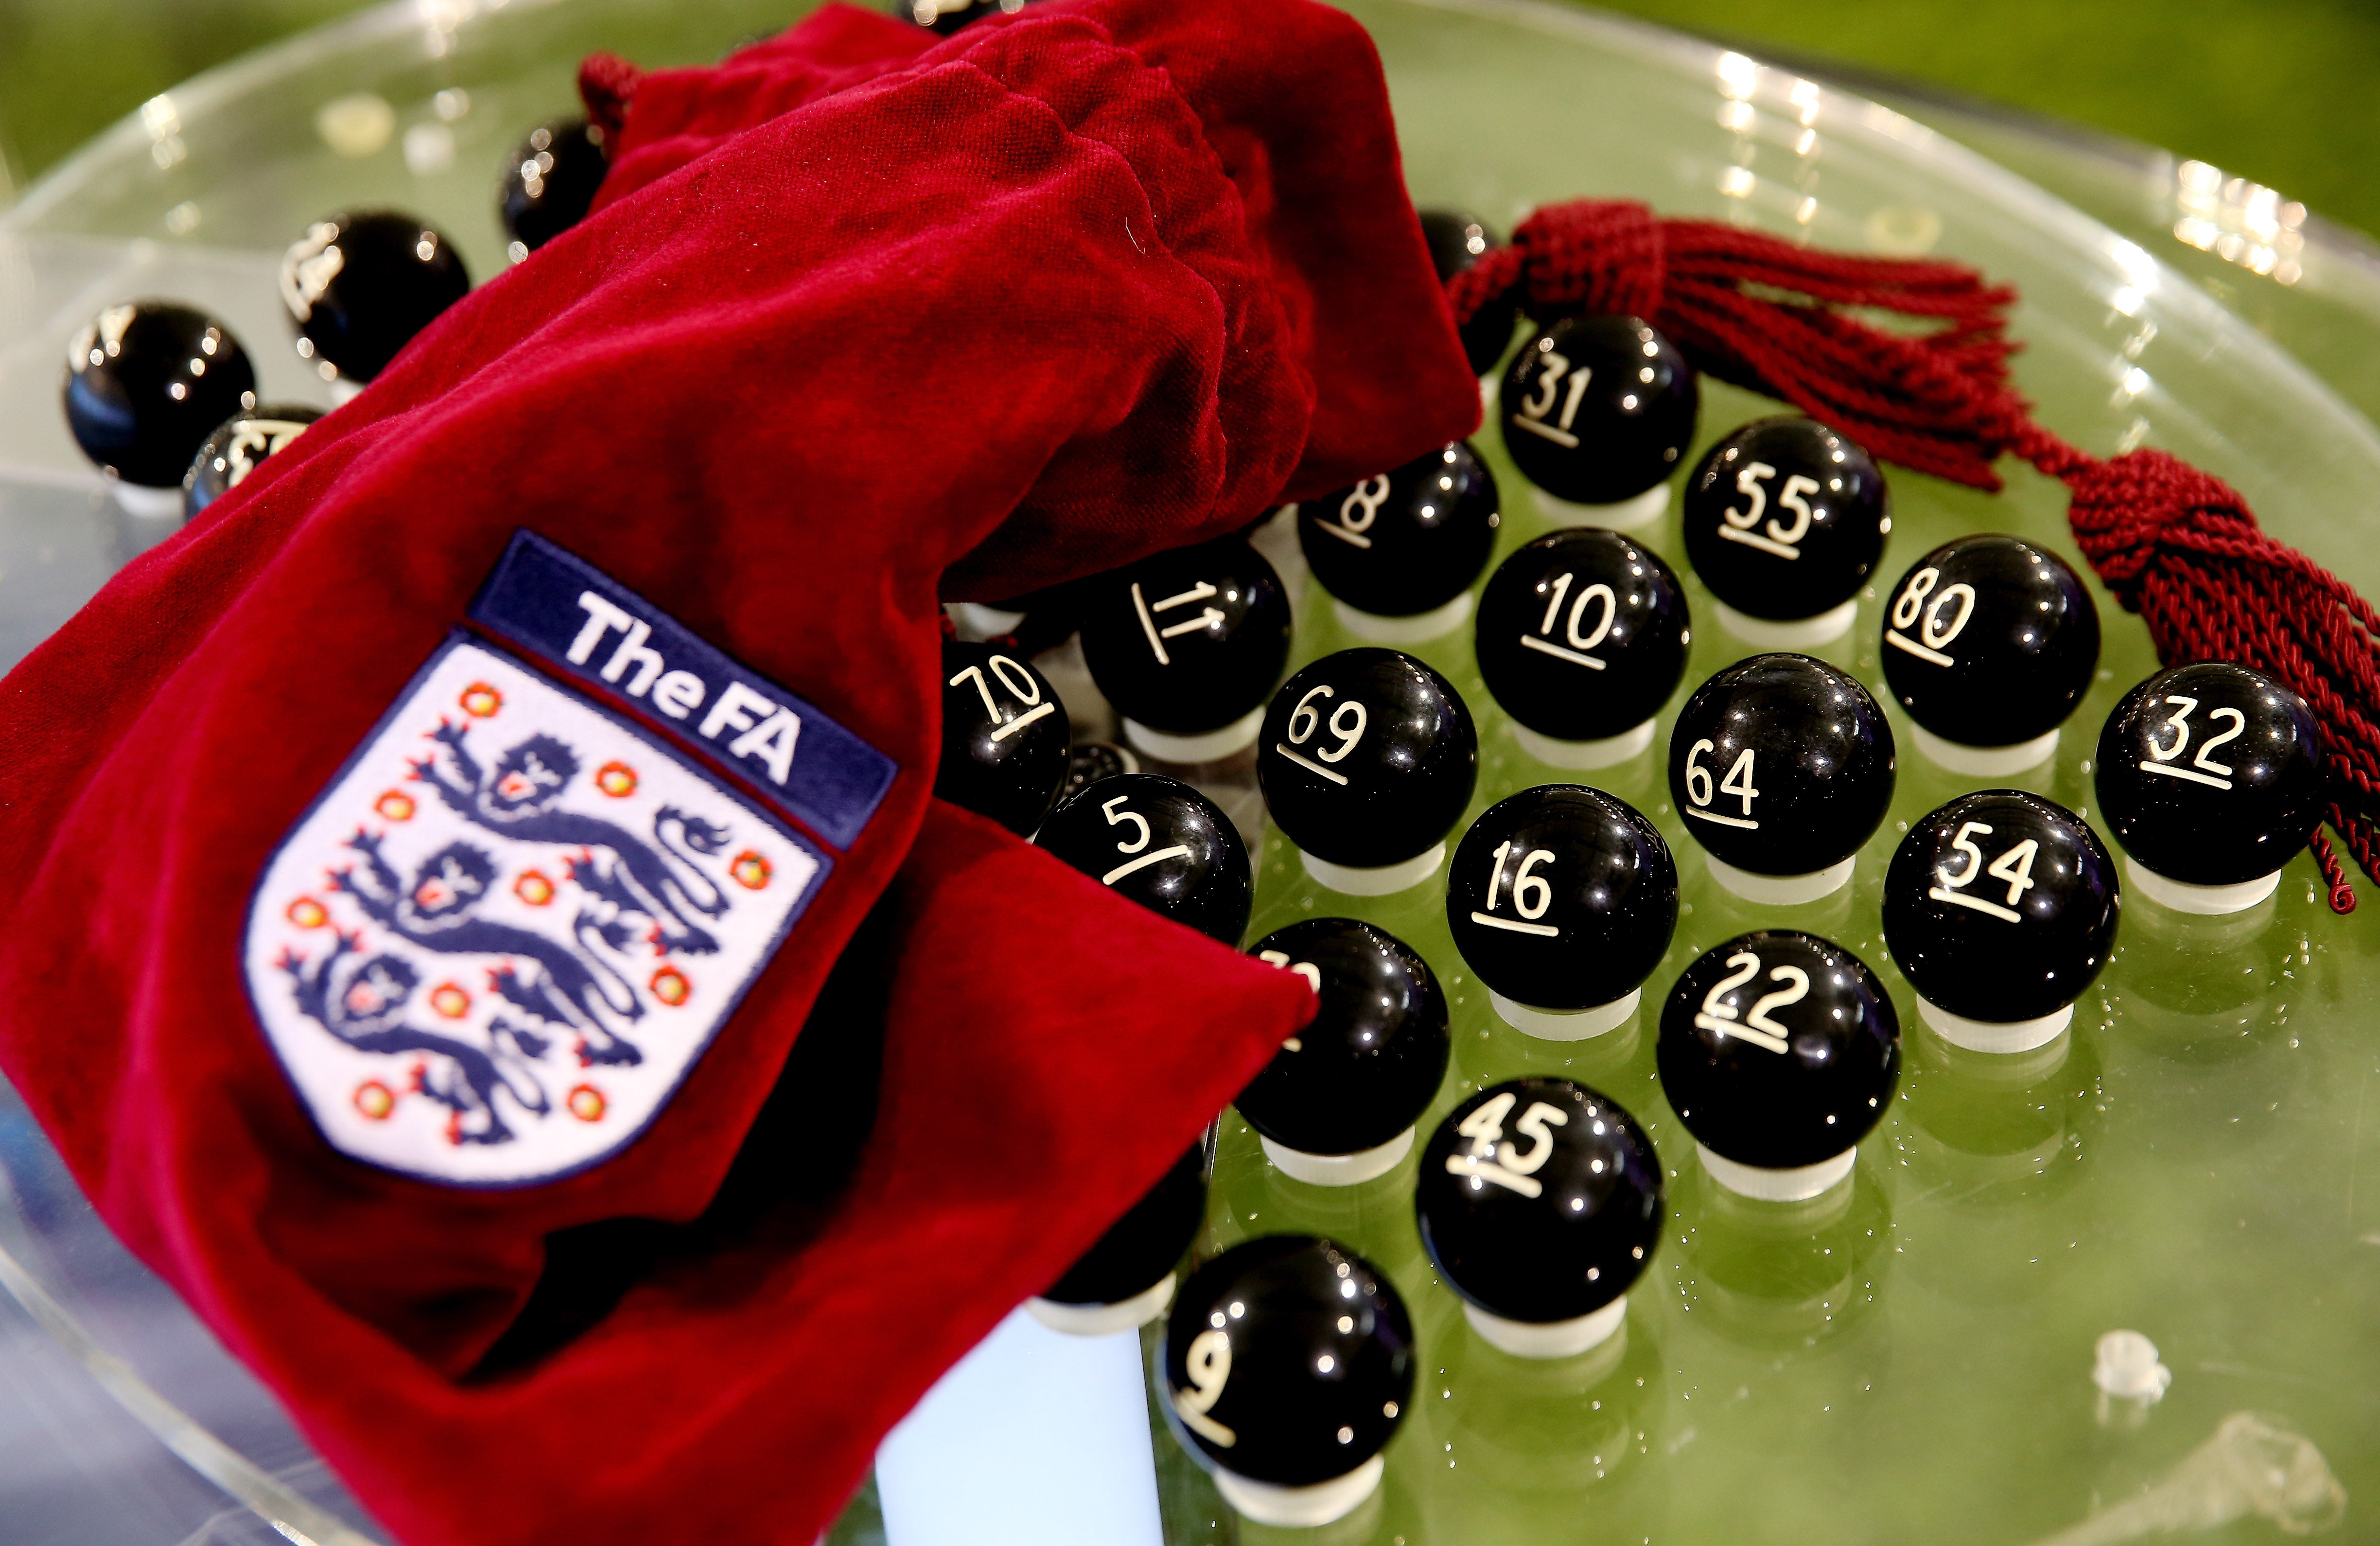 The FA Cup 3rd round draw will see the Premier League teams learn their fate in the competition